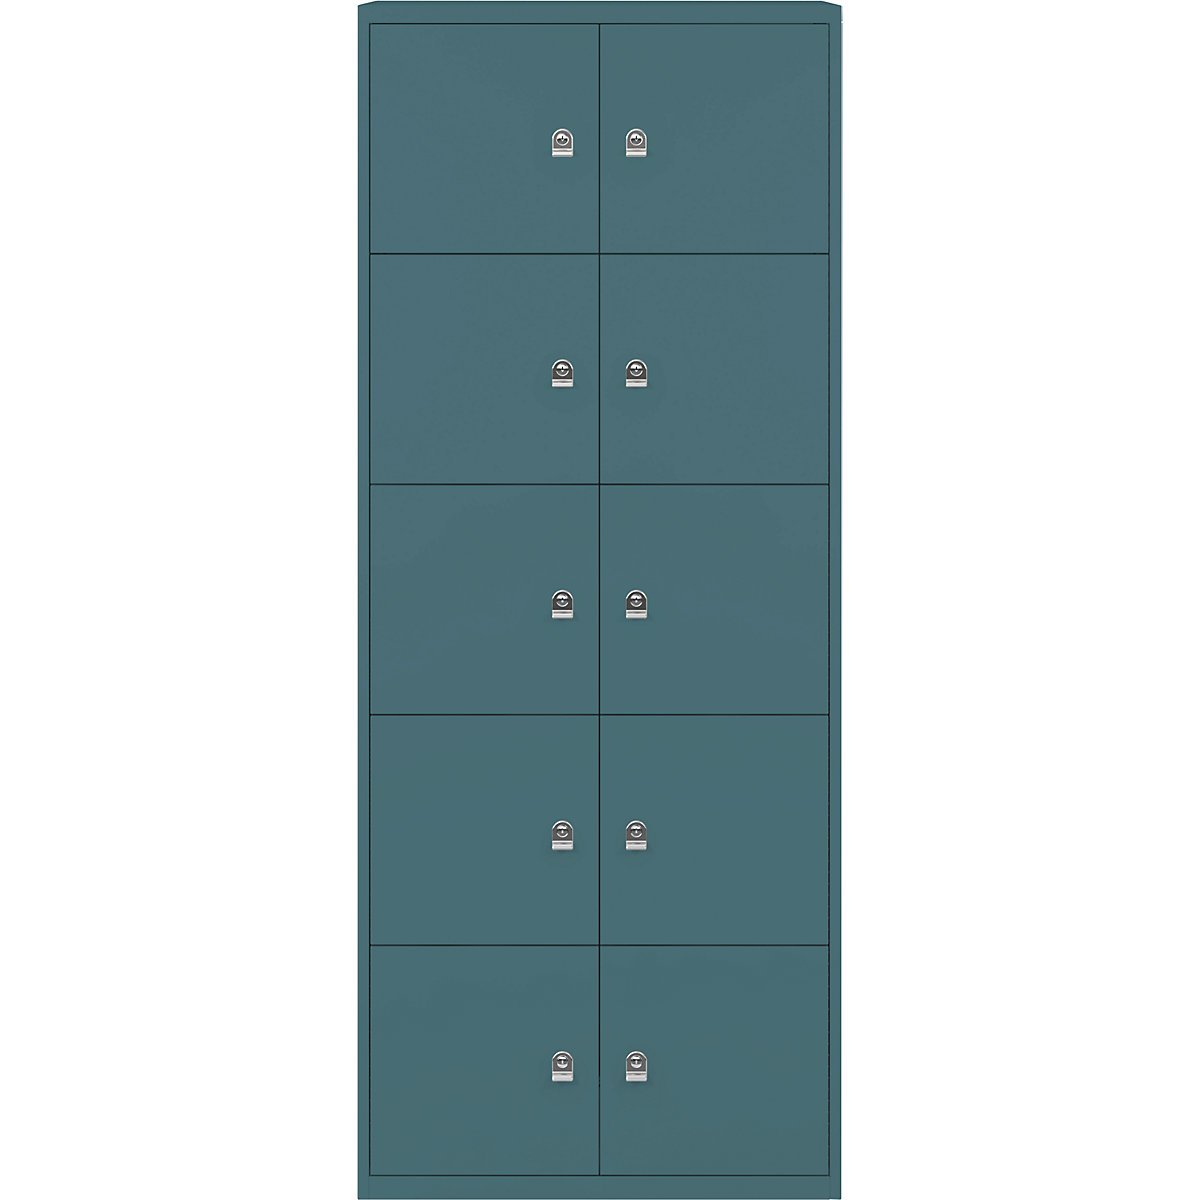 BISLEY – LateralFile™ lodge, with 10 lockable compartments, height 375 mm each, doulton